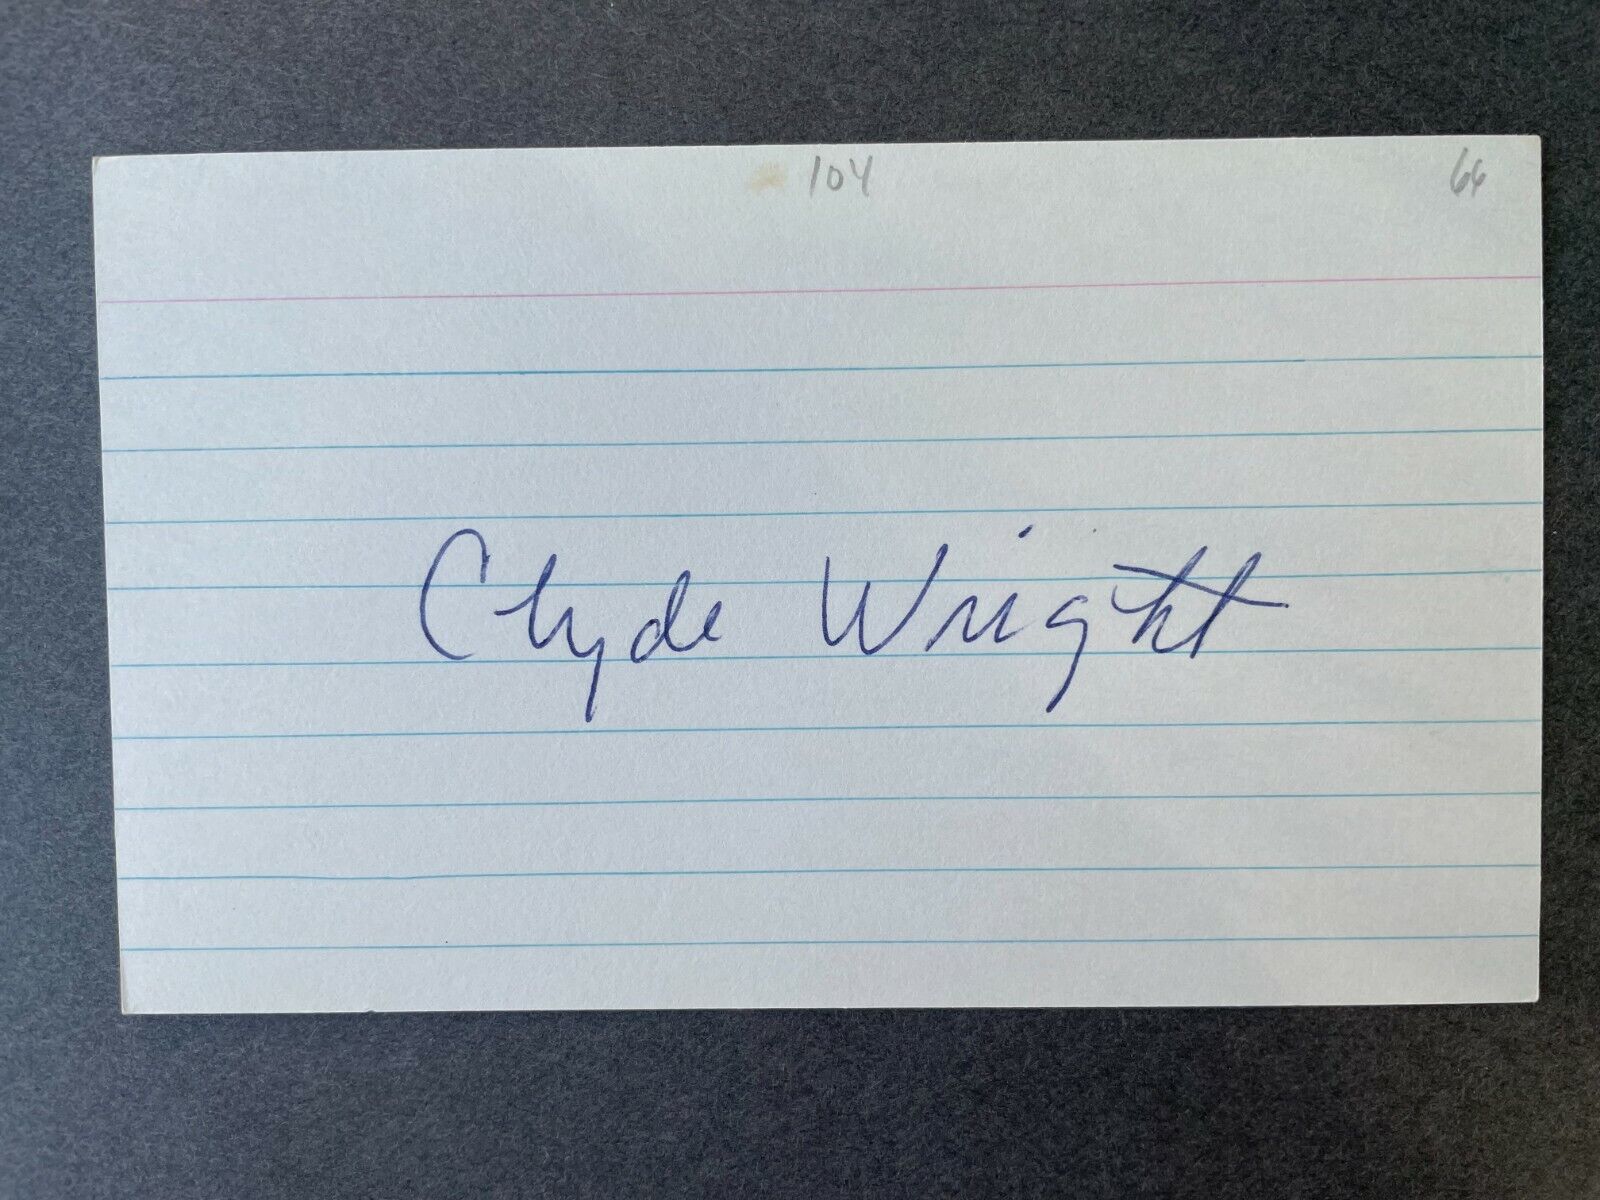 1966 ANGELS: Clyde Wright, SIGNED 3x5 (BSJ)